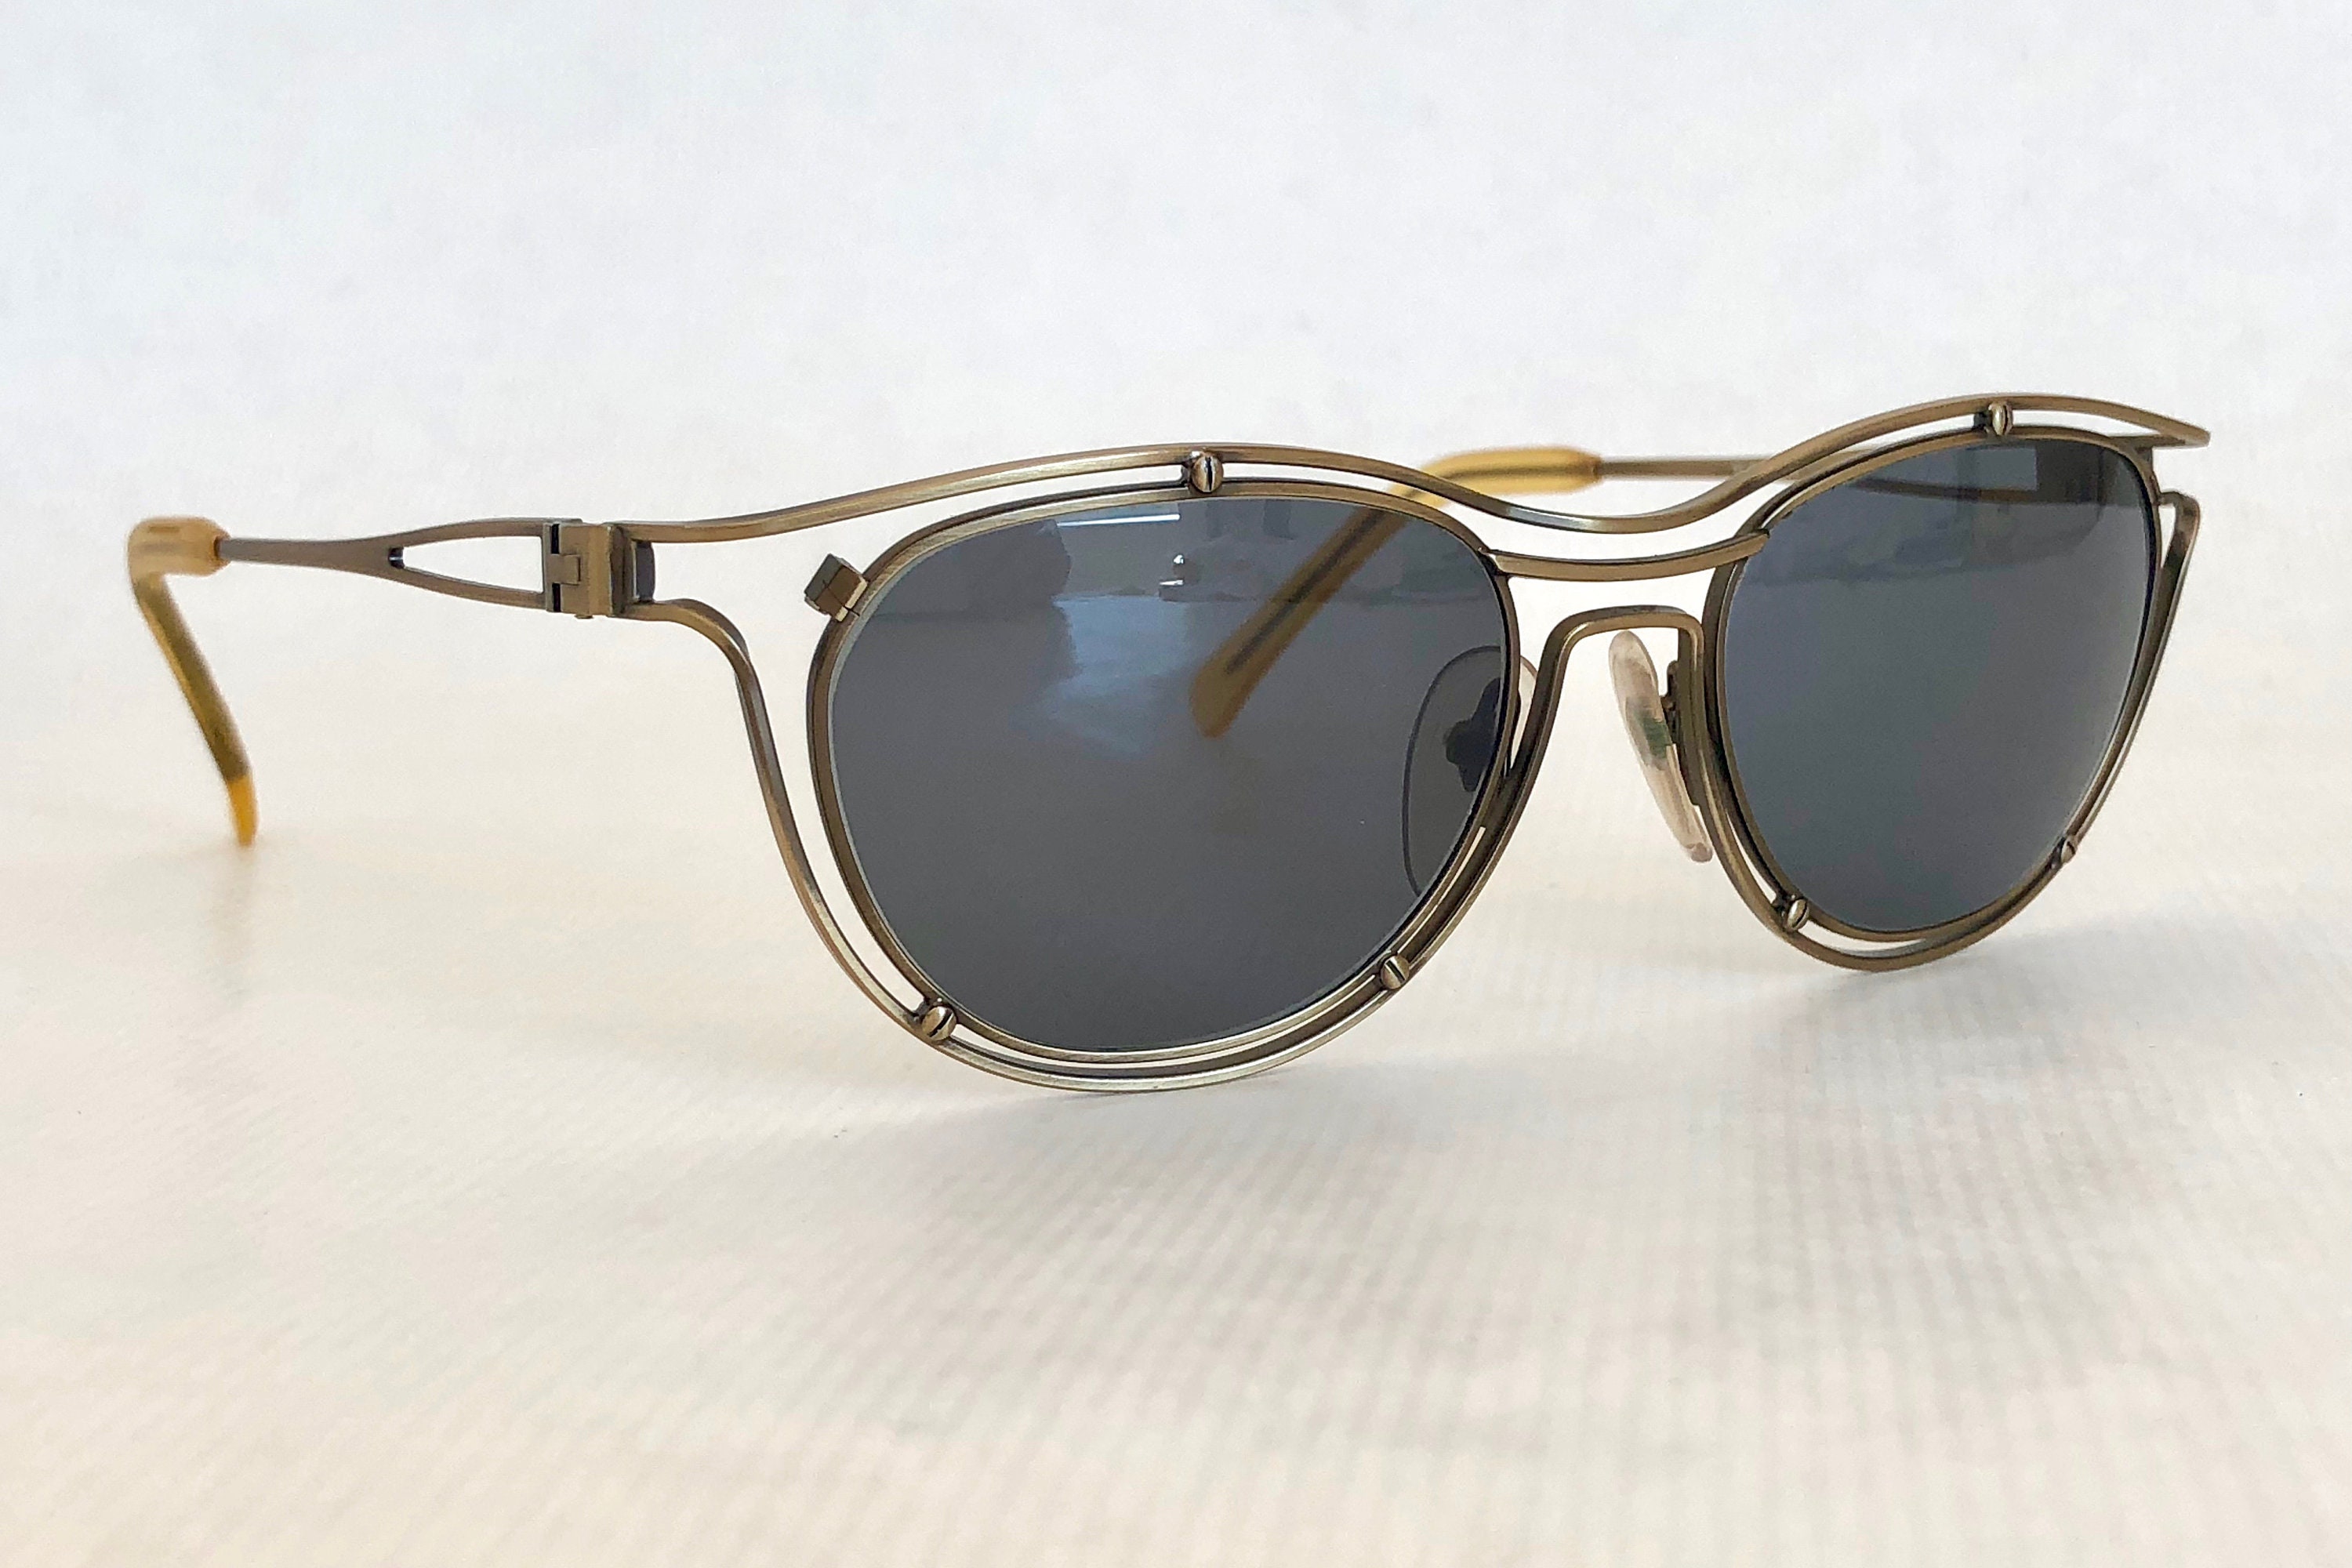 Jean Paul GAULTIER 56-2176 Vintage Sunglasses Made in Japan - New Old Stock